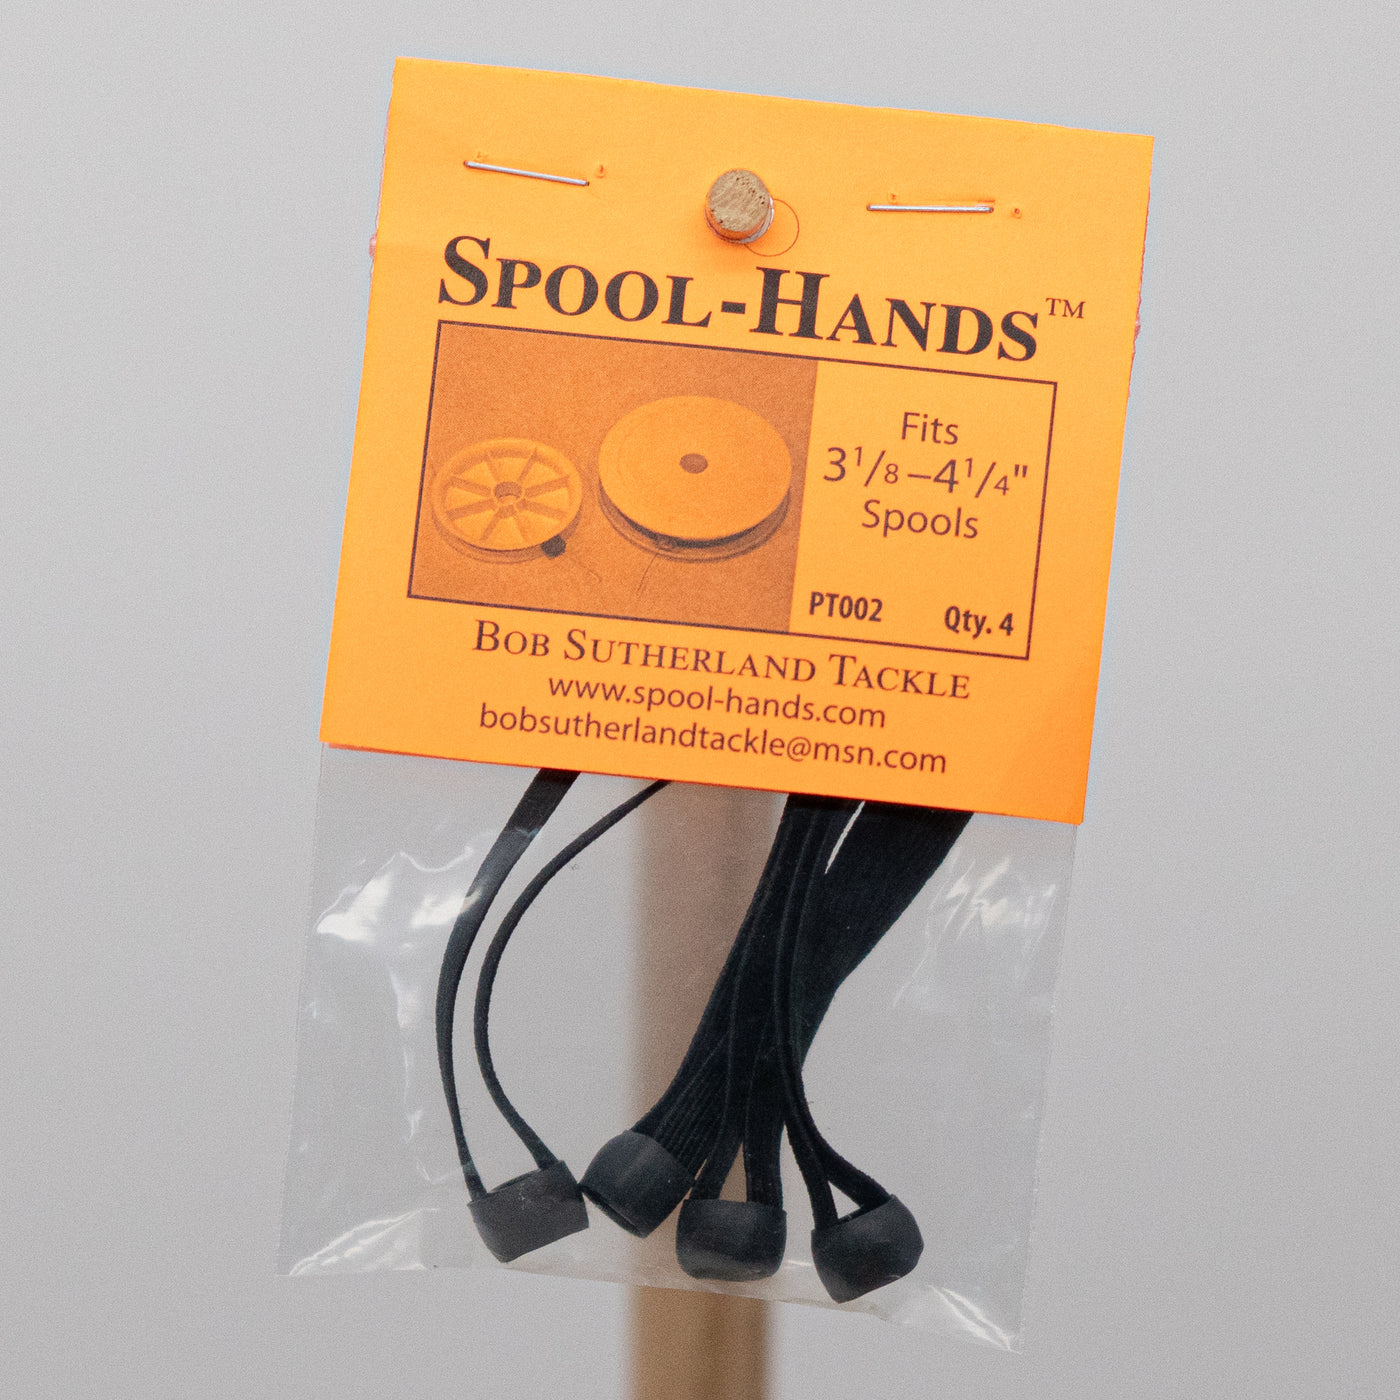 SPOOL HANDS FOR 3 1/8 - 4 1/4 SPOOLS 4 PACK